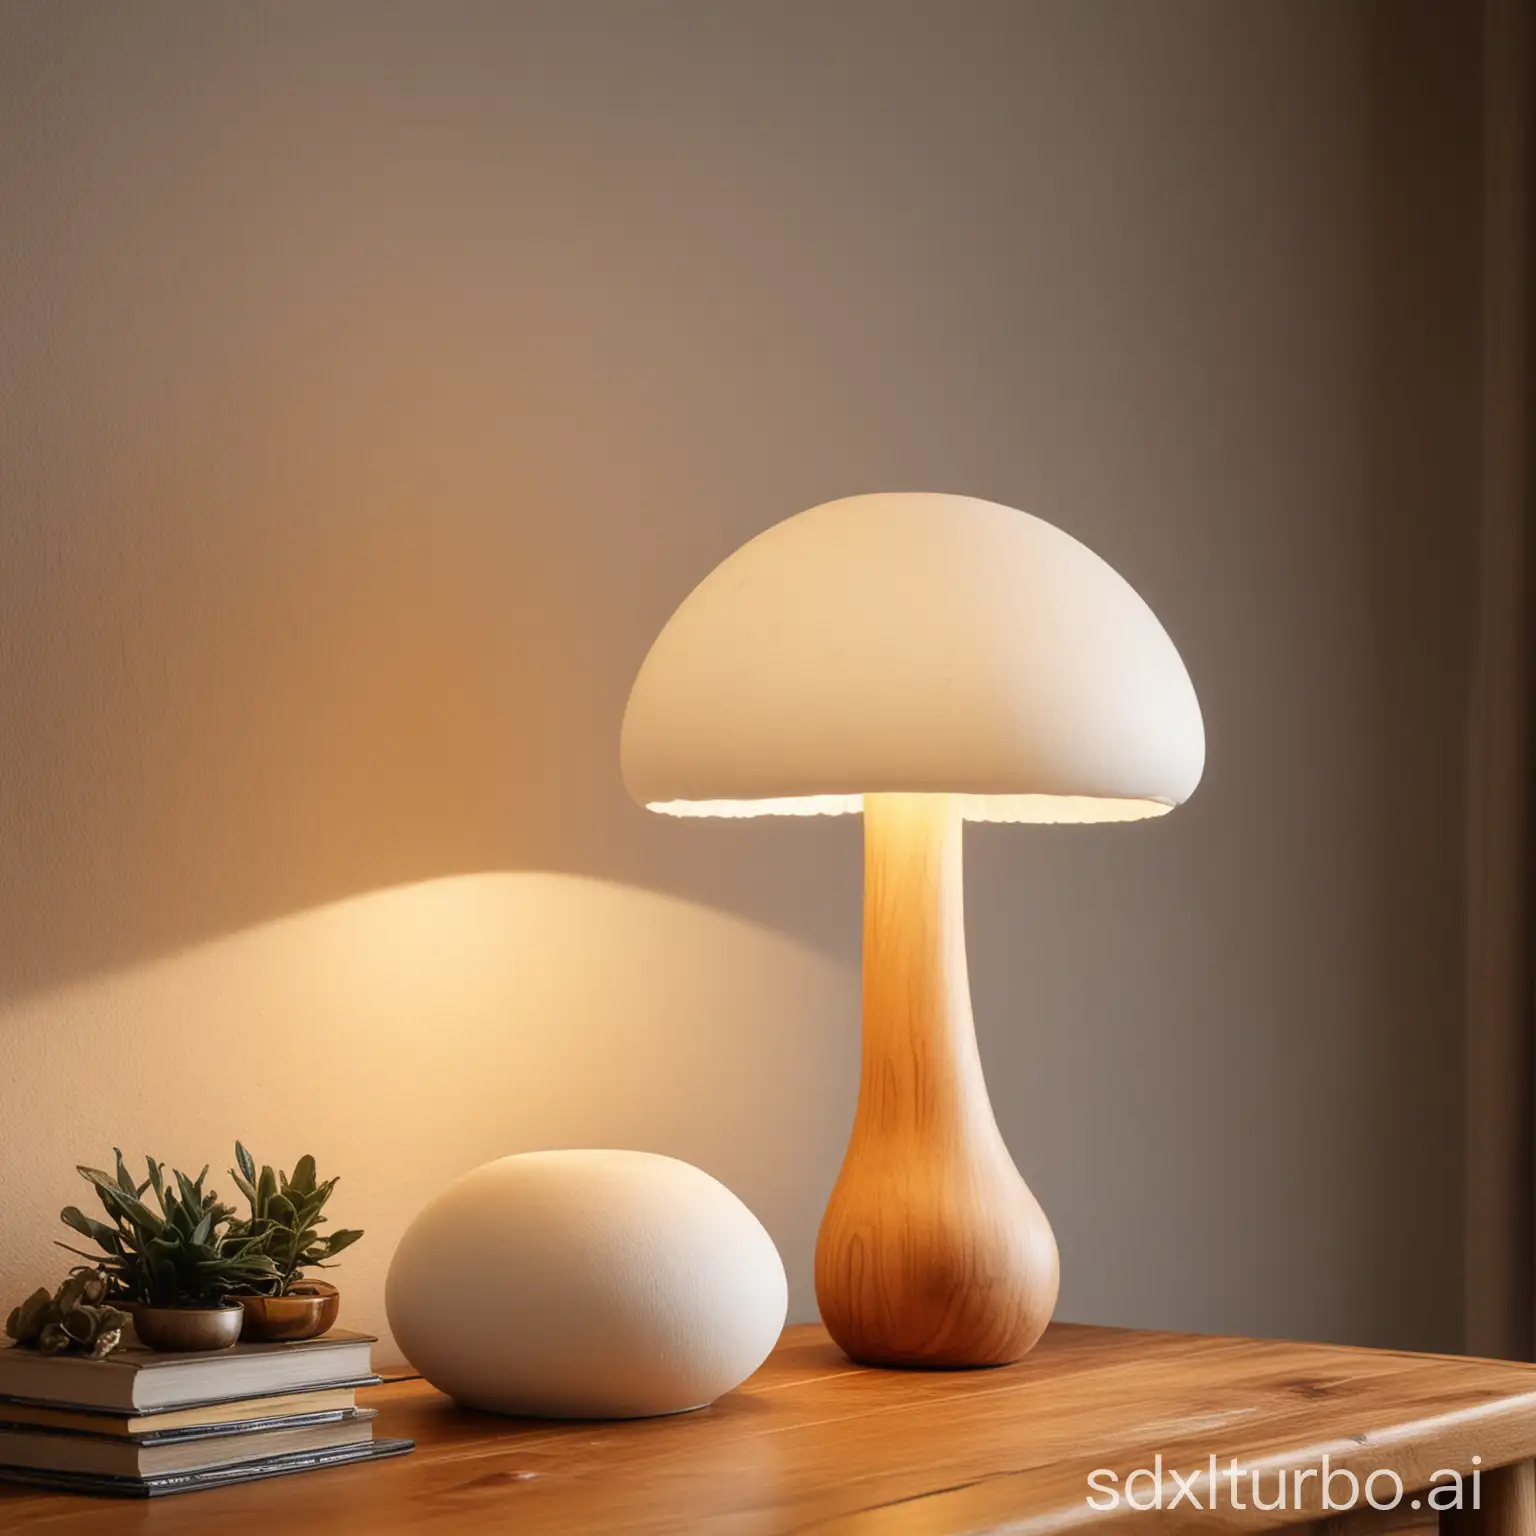 A white mushroom-shaped table lamp sits on a wooden desk. The lamp has a simple, elegant design with a rounded base and a curved shade. The light from the lamp casts a warm, inviting glow.